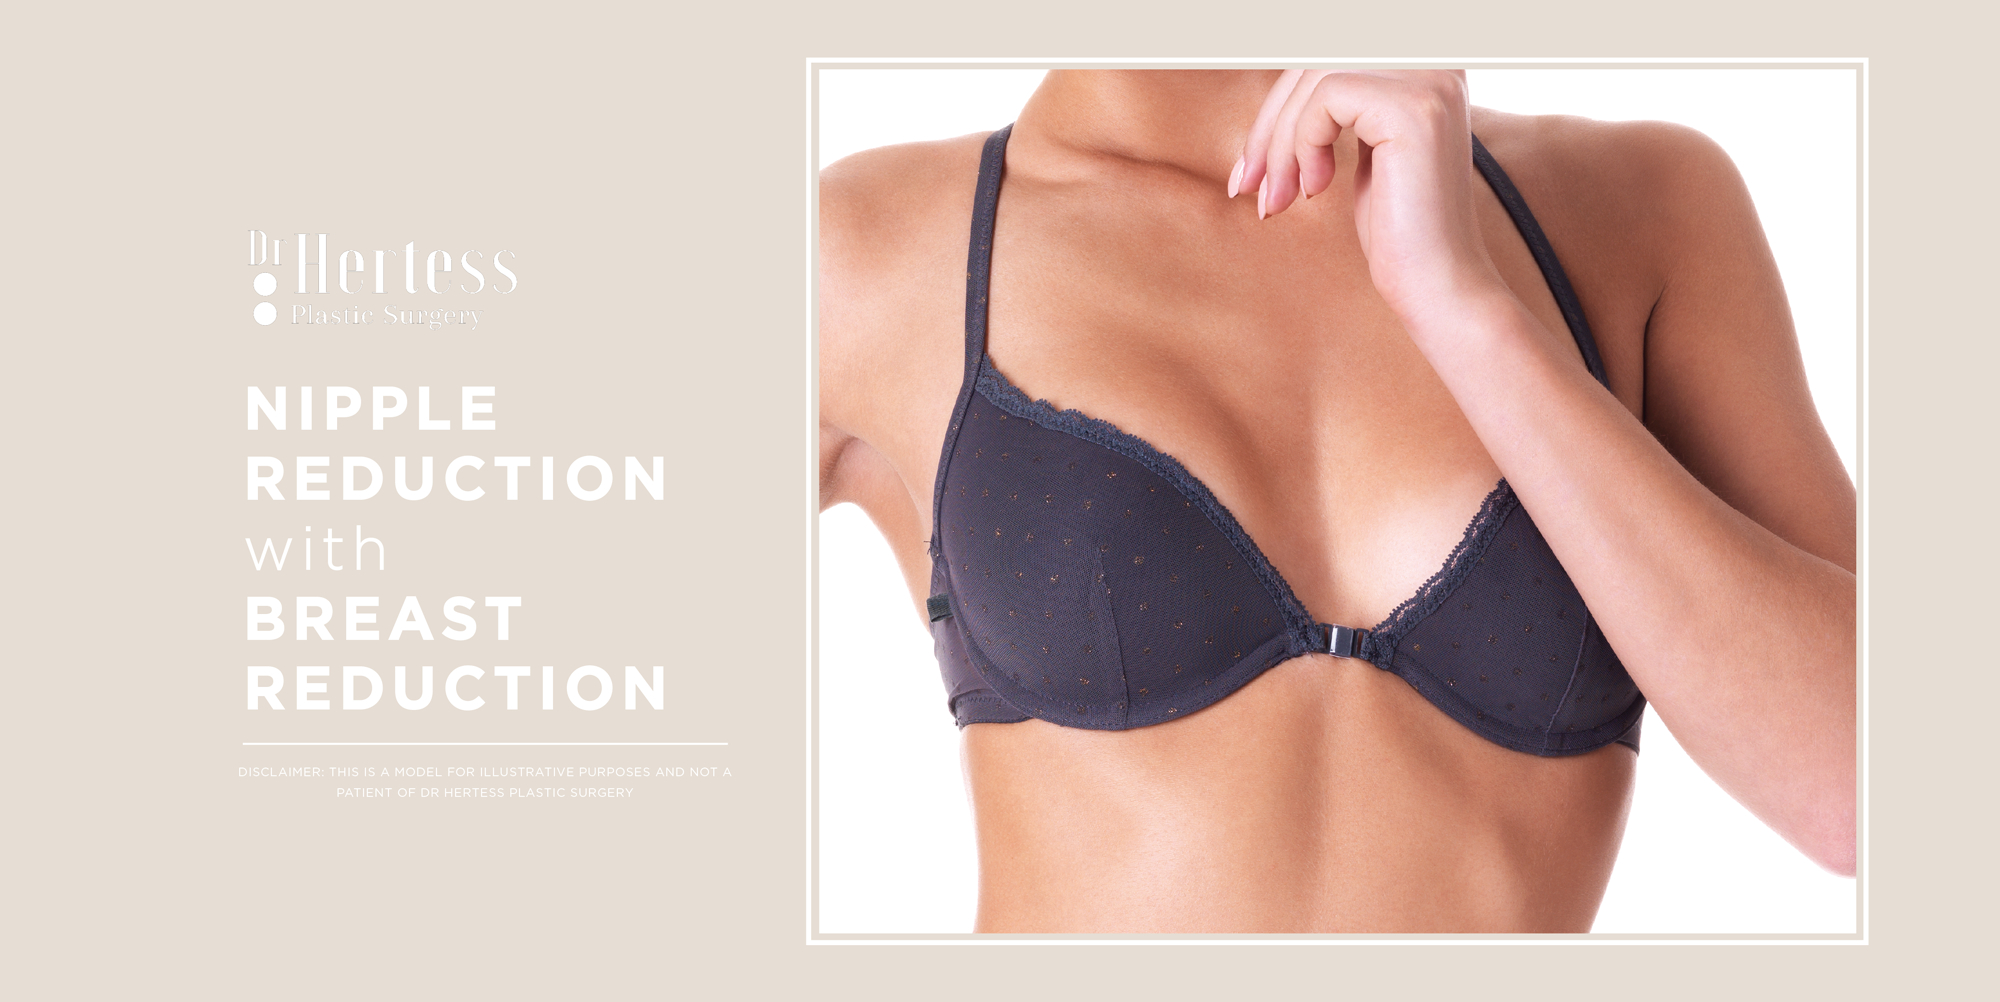 Nipple reduction with breast reduction